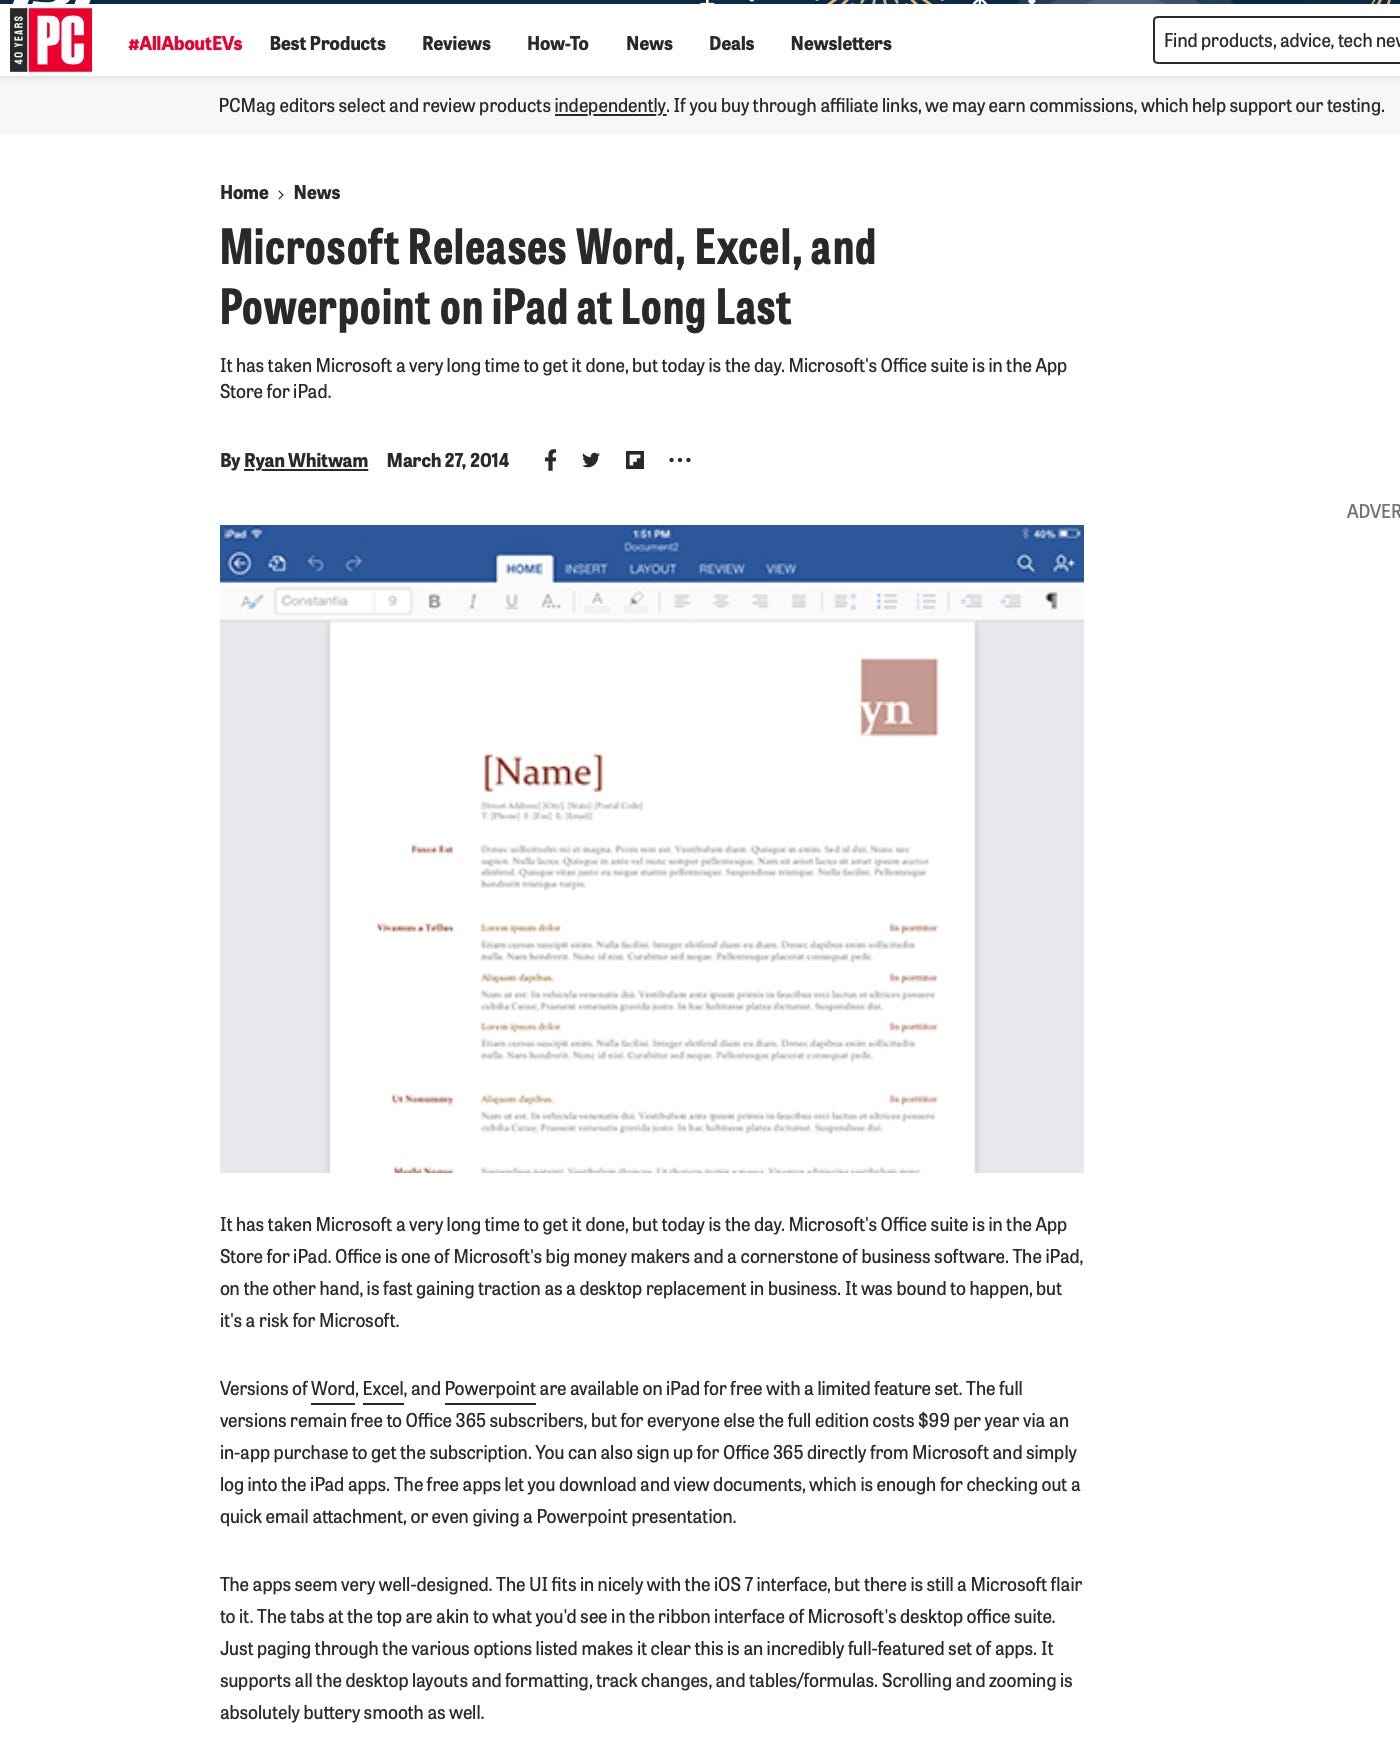 Microsoft Releases Word, Excel, and Powerpoint on iPad at Long Last It has taken Microsoft a very long time to get it done, but today is the day. Microsoft's Office suite is in the App Store for iPad. By Ryan Whitwam March 27, 2014